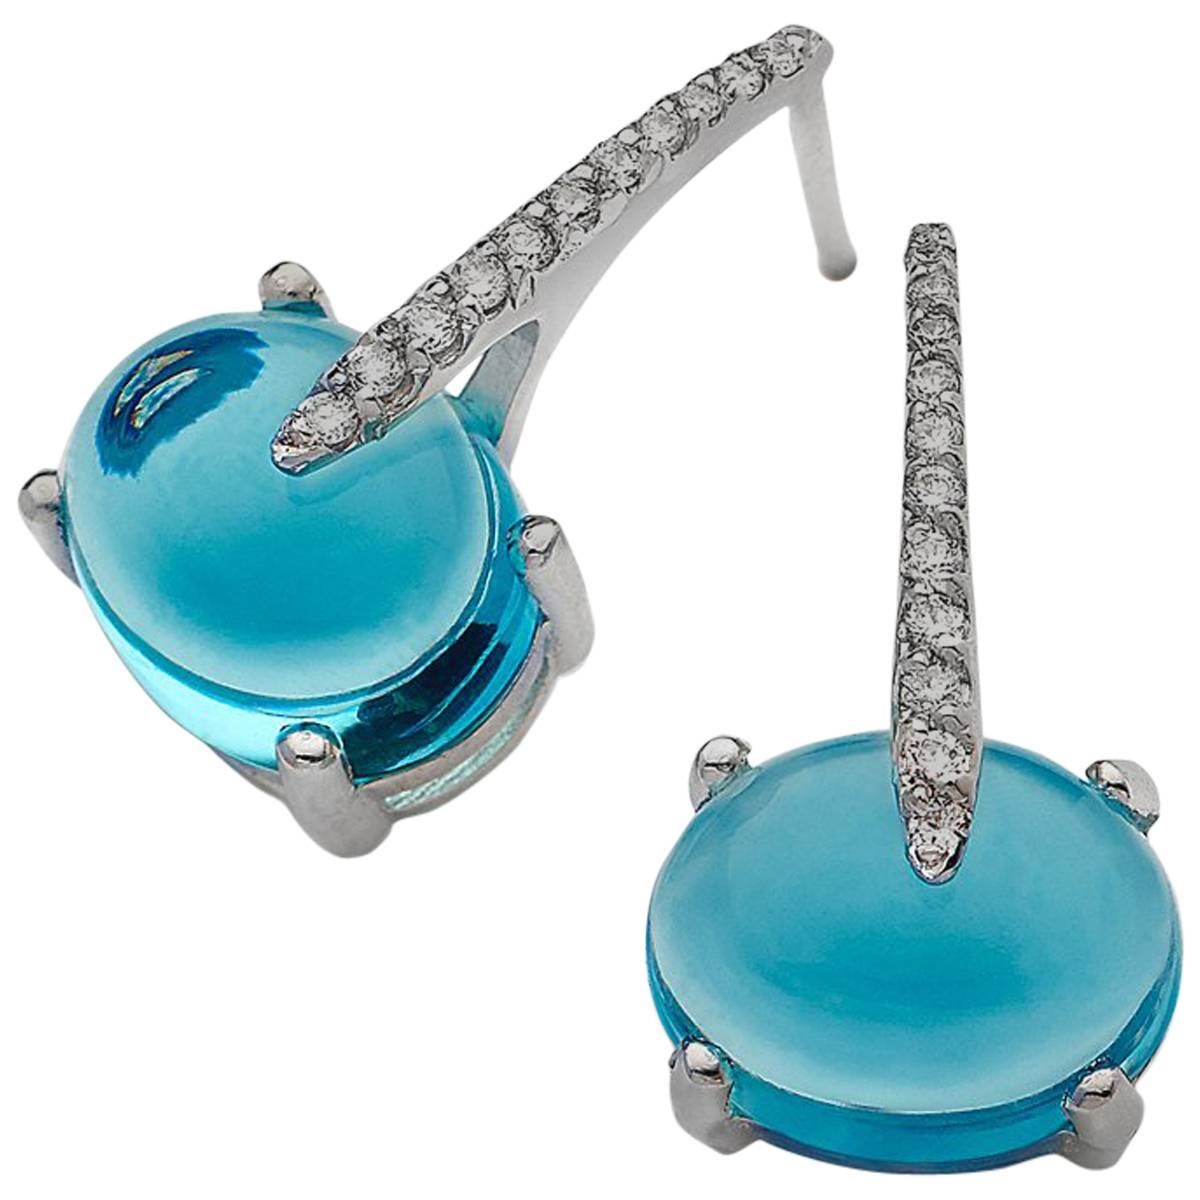 Sardinia Short Diamond
18ct white gold diamond earrings, 8x10mm cabochon stone
What more could a girl ask for? These gorgeous drop earrings have both diamonds and a contemporary design that adds a bit of glamour!

Set in solid 18kt White Gold, these